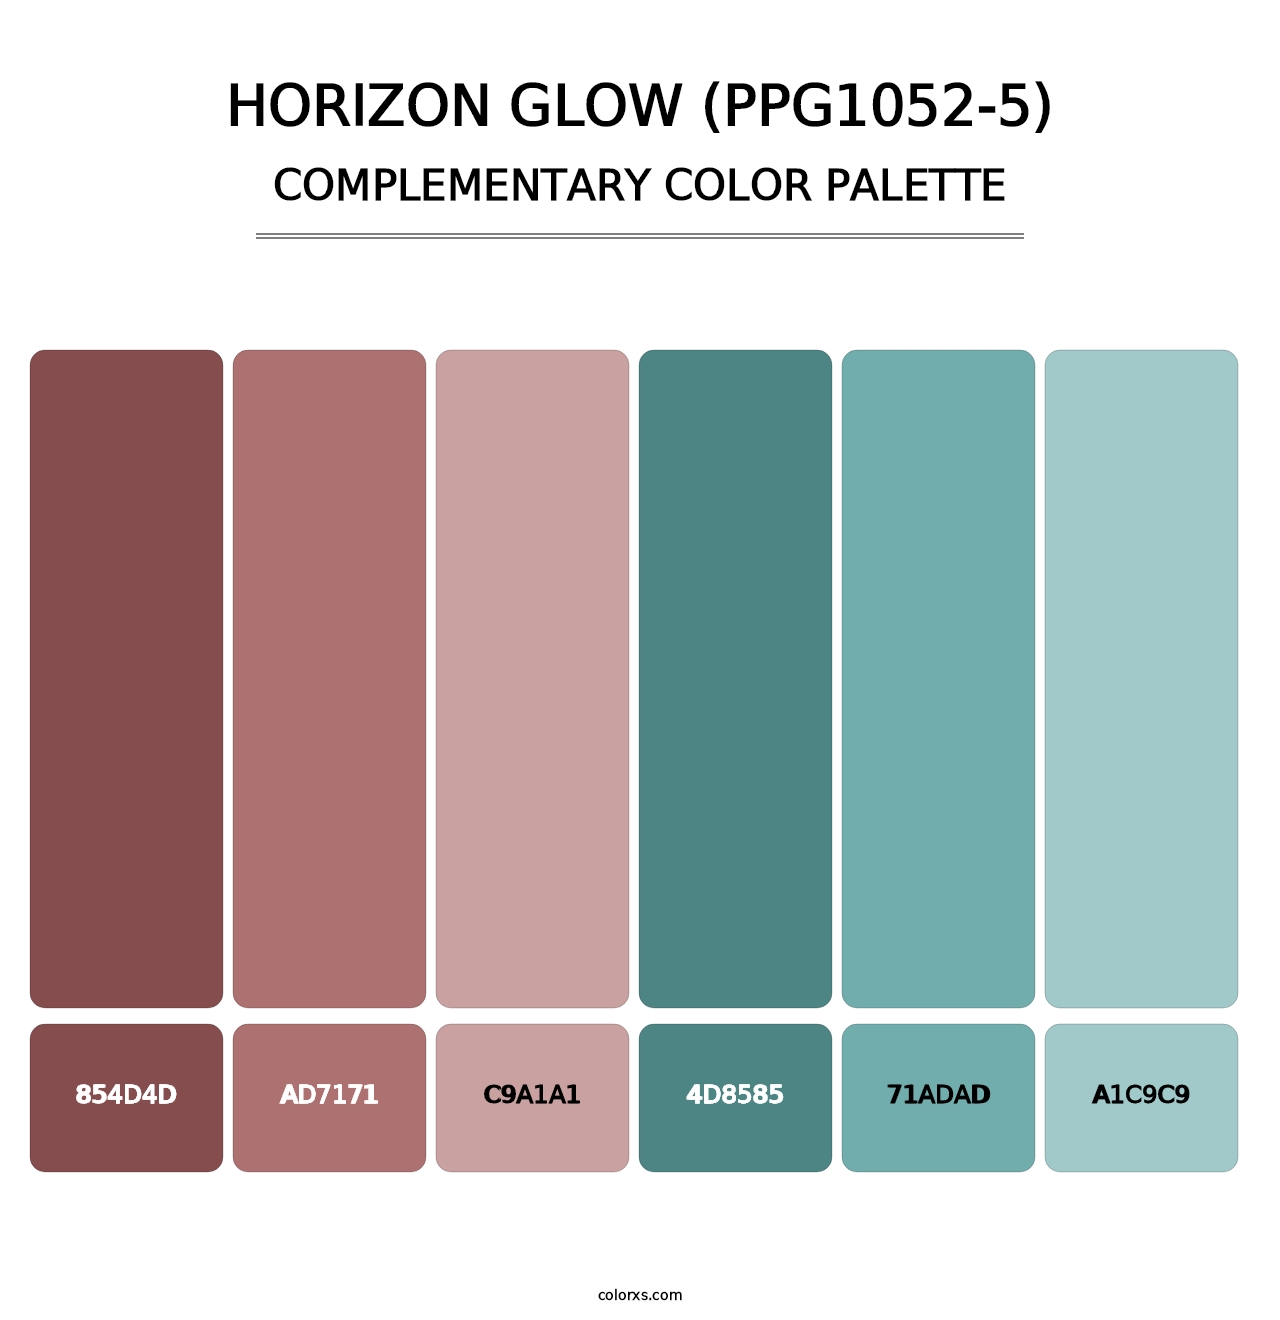 Horizon Glow (PPG1052-5) - Complementary Color Palette